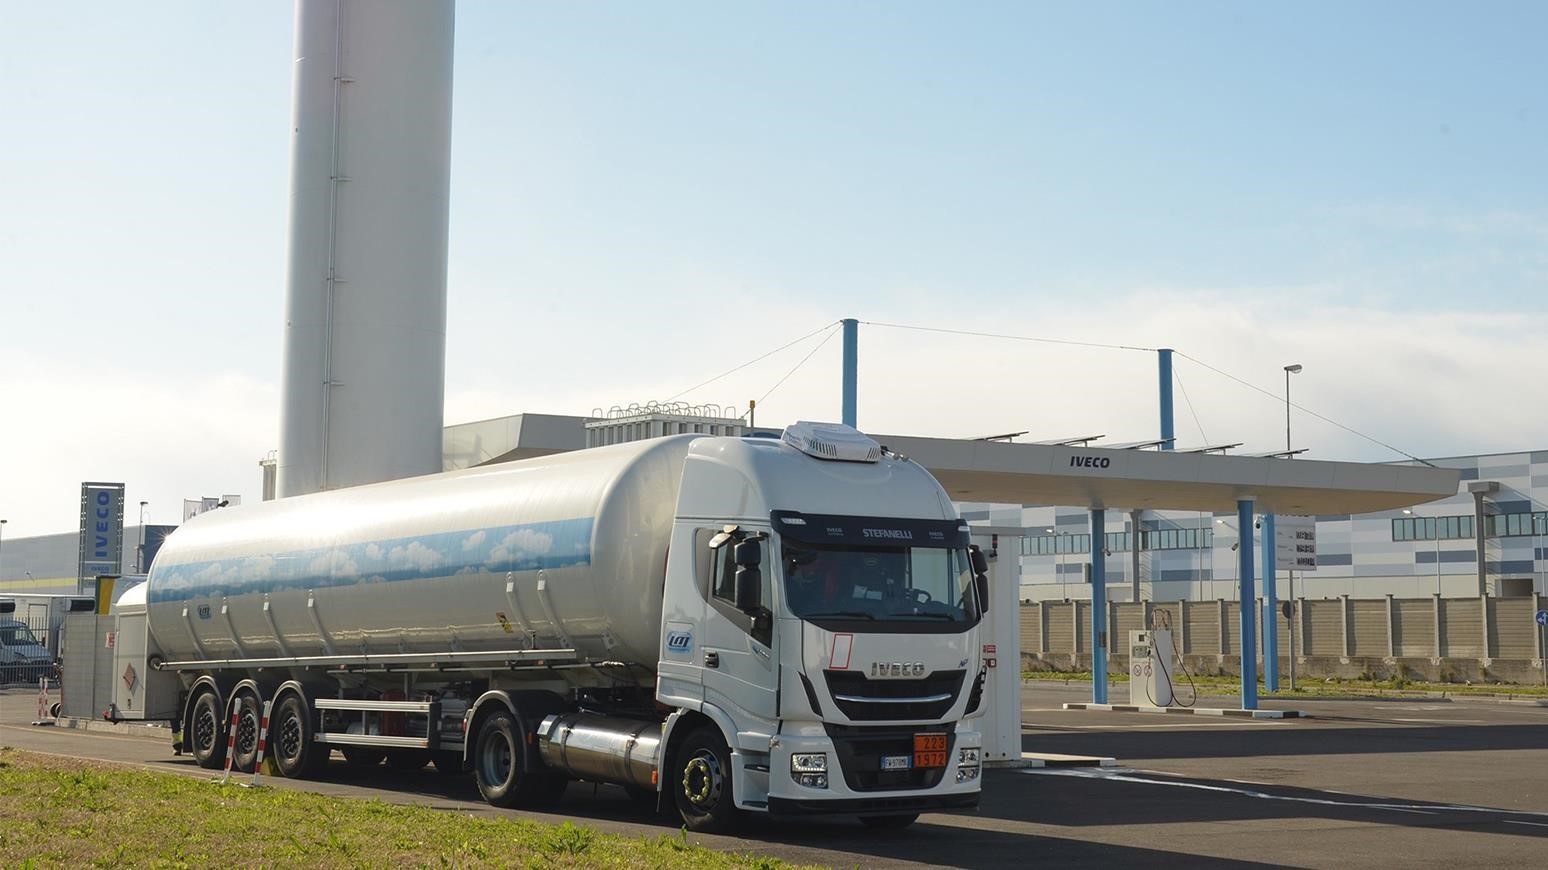 IVECO Partners With ENGIE & Vulcangas To Bring Biomethane To Turin